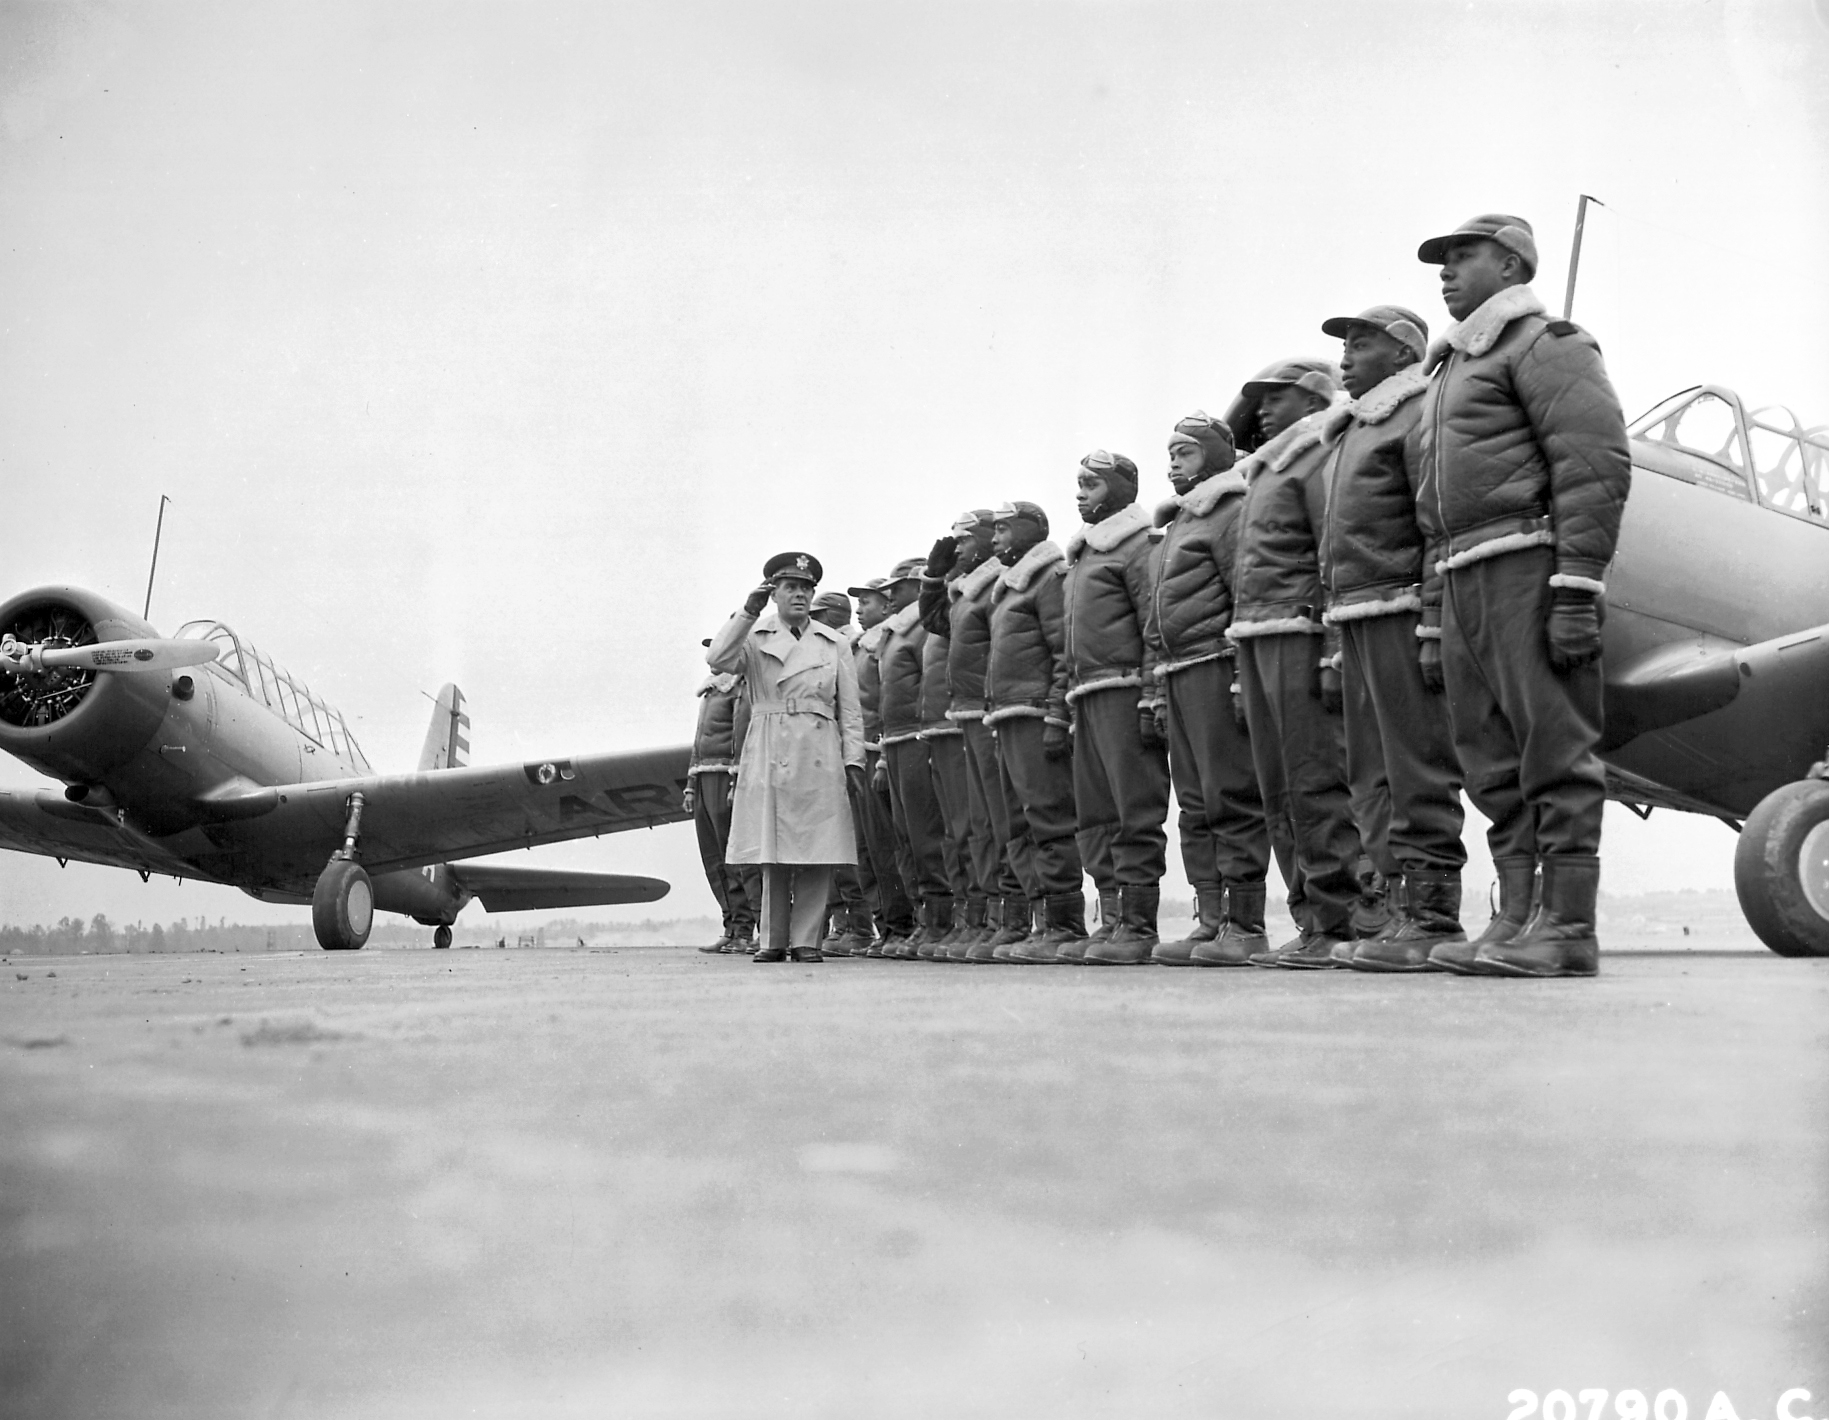 A Tuskegee Airman's Story of Heroism and Service